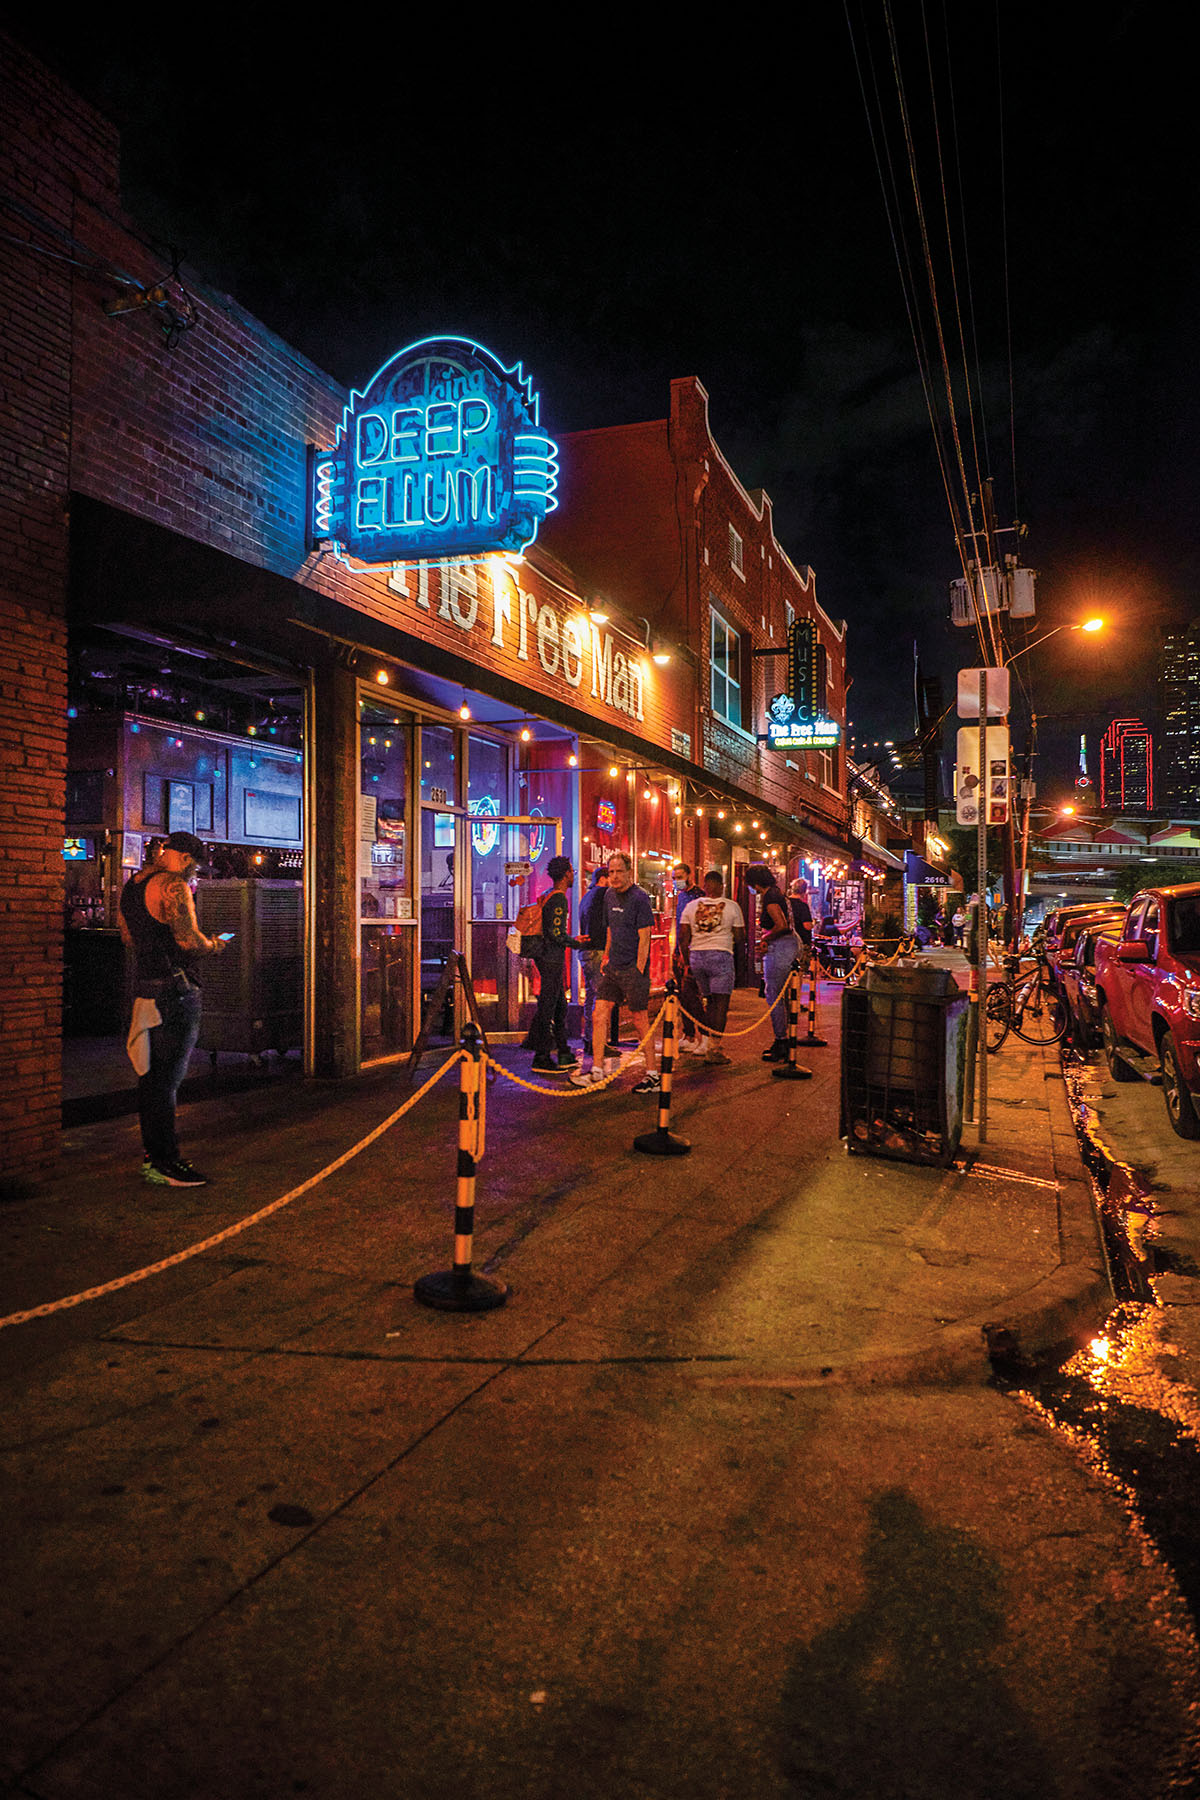 A nighttime scene of a blue neon sign reading "Deep Ellum" with people walking on the street below